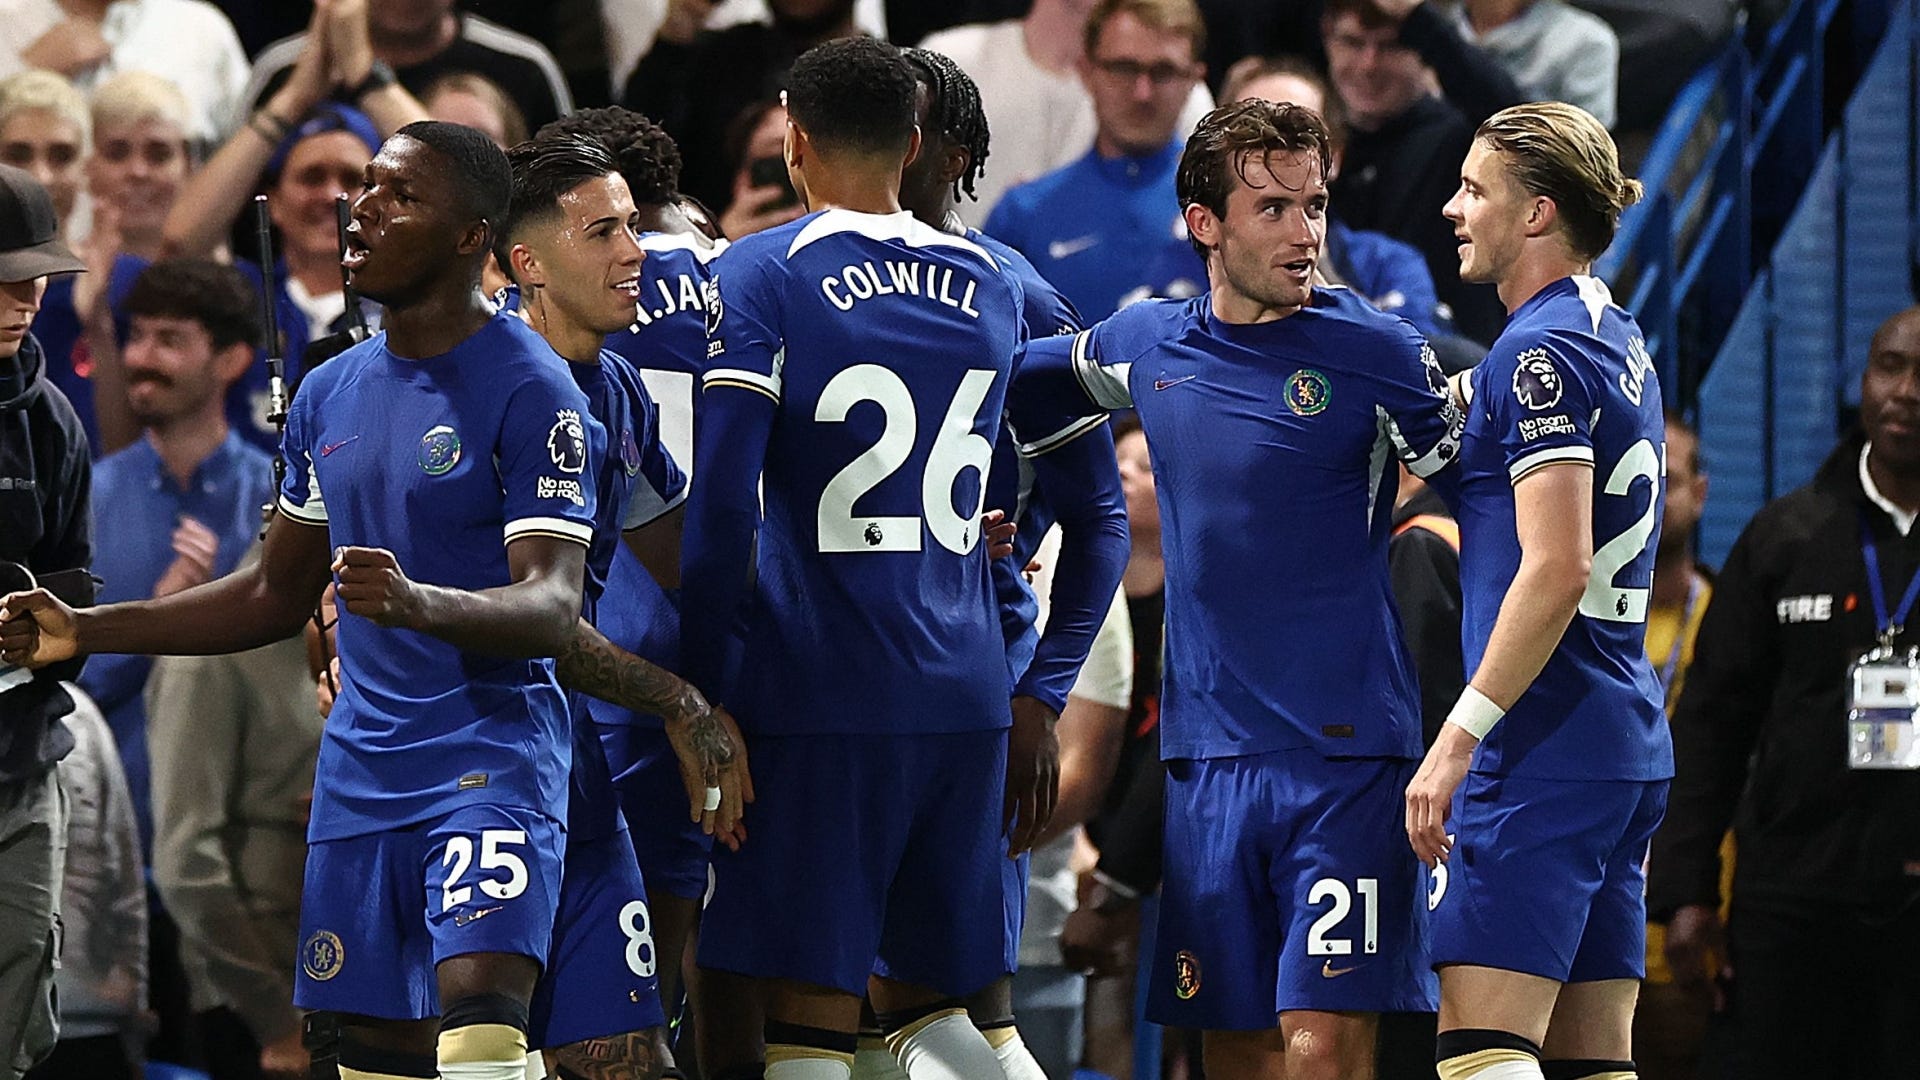 Chelsea vs Wimbledon Live stream, TV channel, kick-off time and where to watch Goal Australia